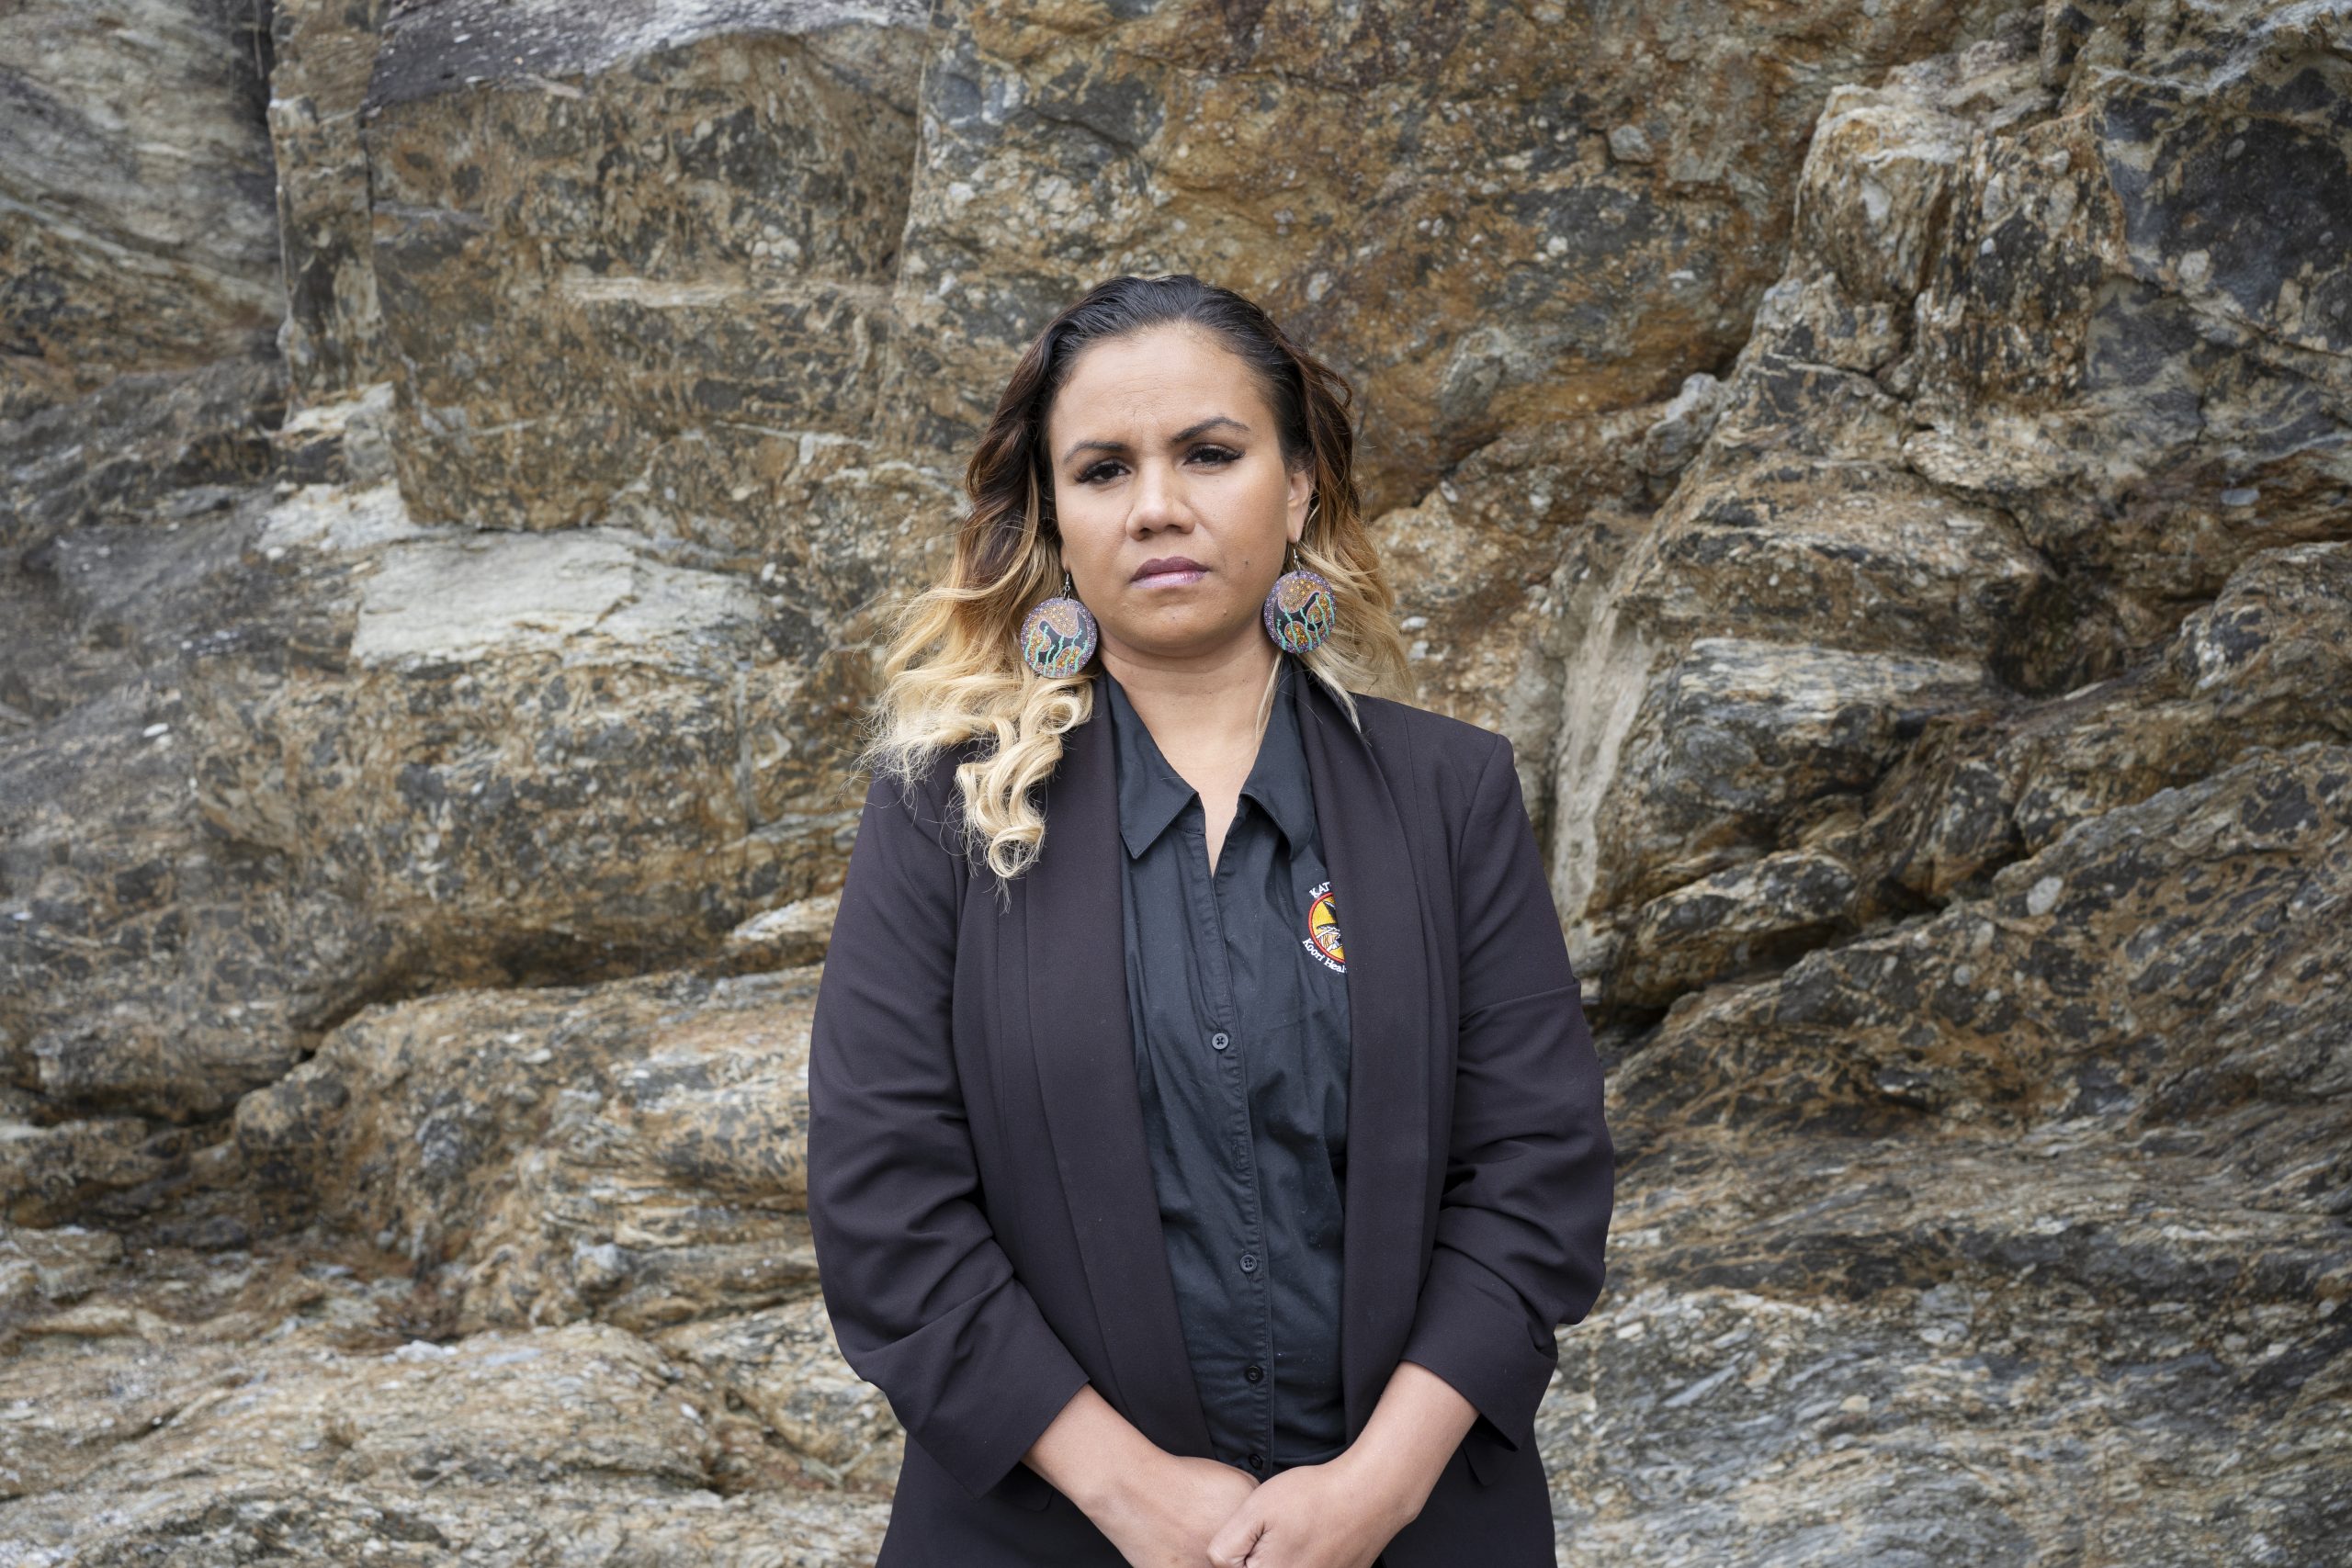 Malua Bay, NSW: Kayeleen Brown is a proud Walbunja and Wehlabul Bundjalung woman. She advocated tirelessly for cultural fishing rights on the NSW South Coast. Photo: Aimee Han/Oxfam